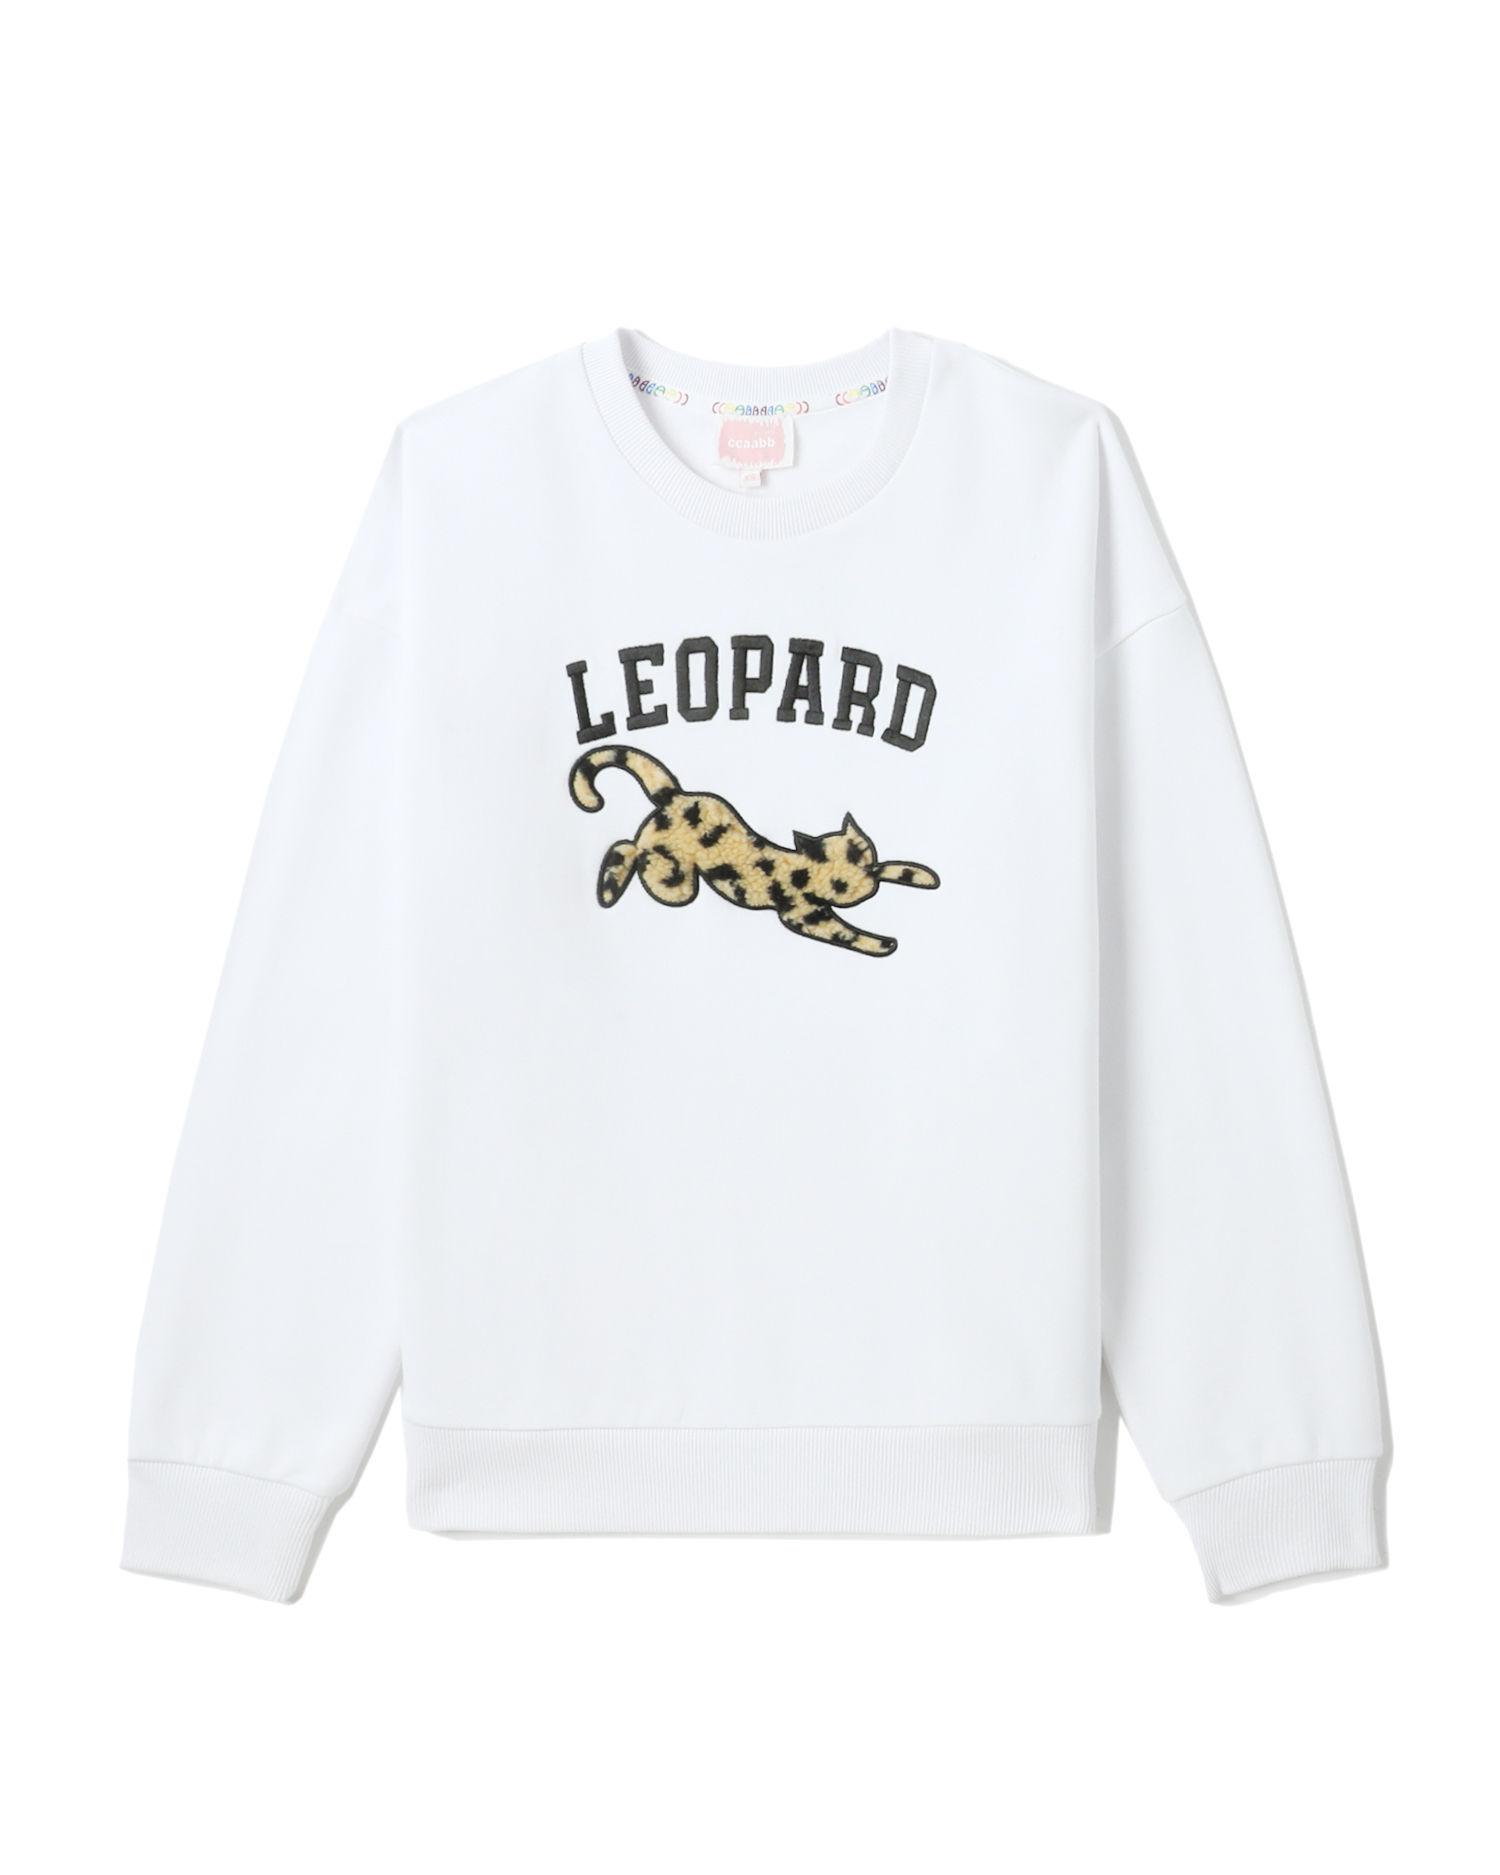 Leopard graphic embroidered sweatshirt by CCAABB